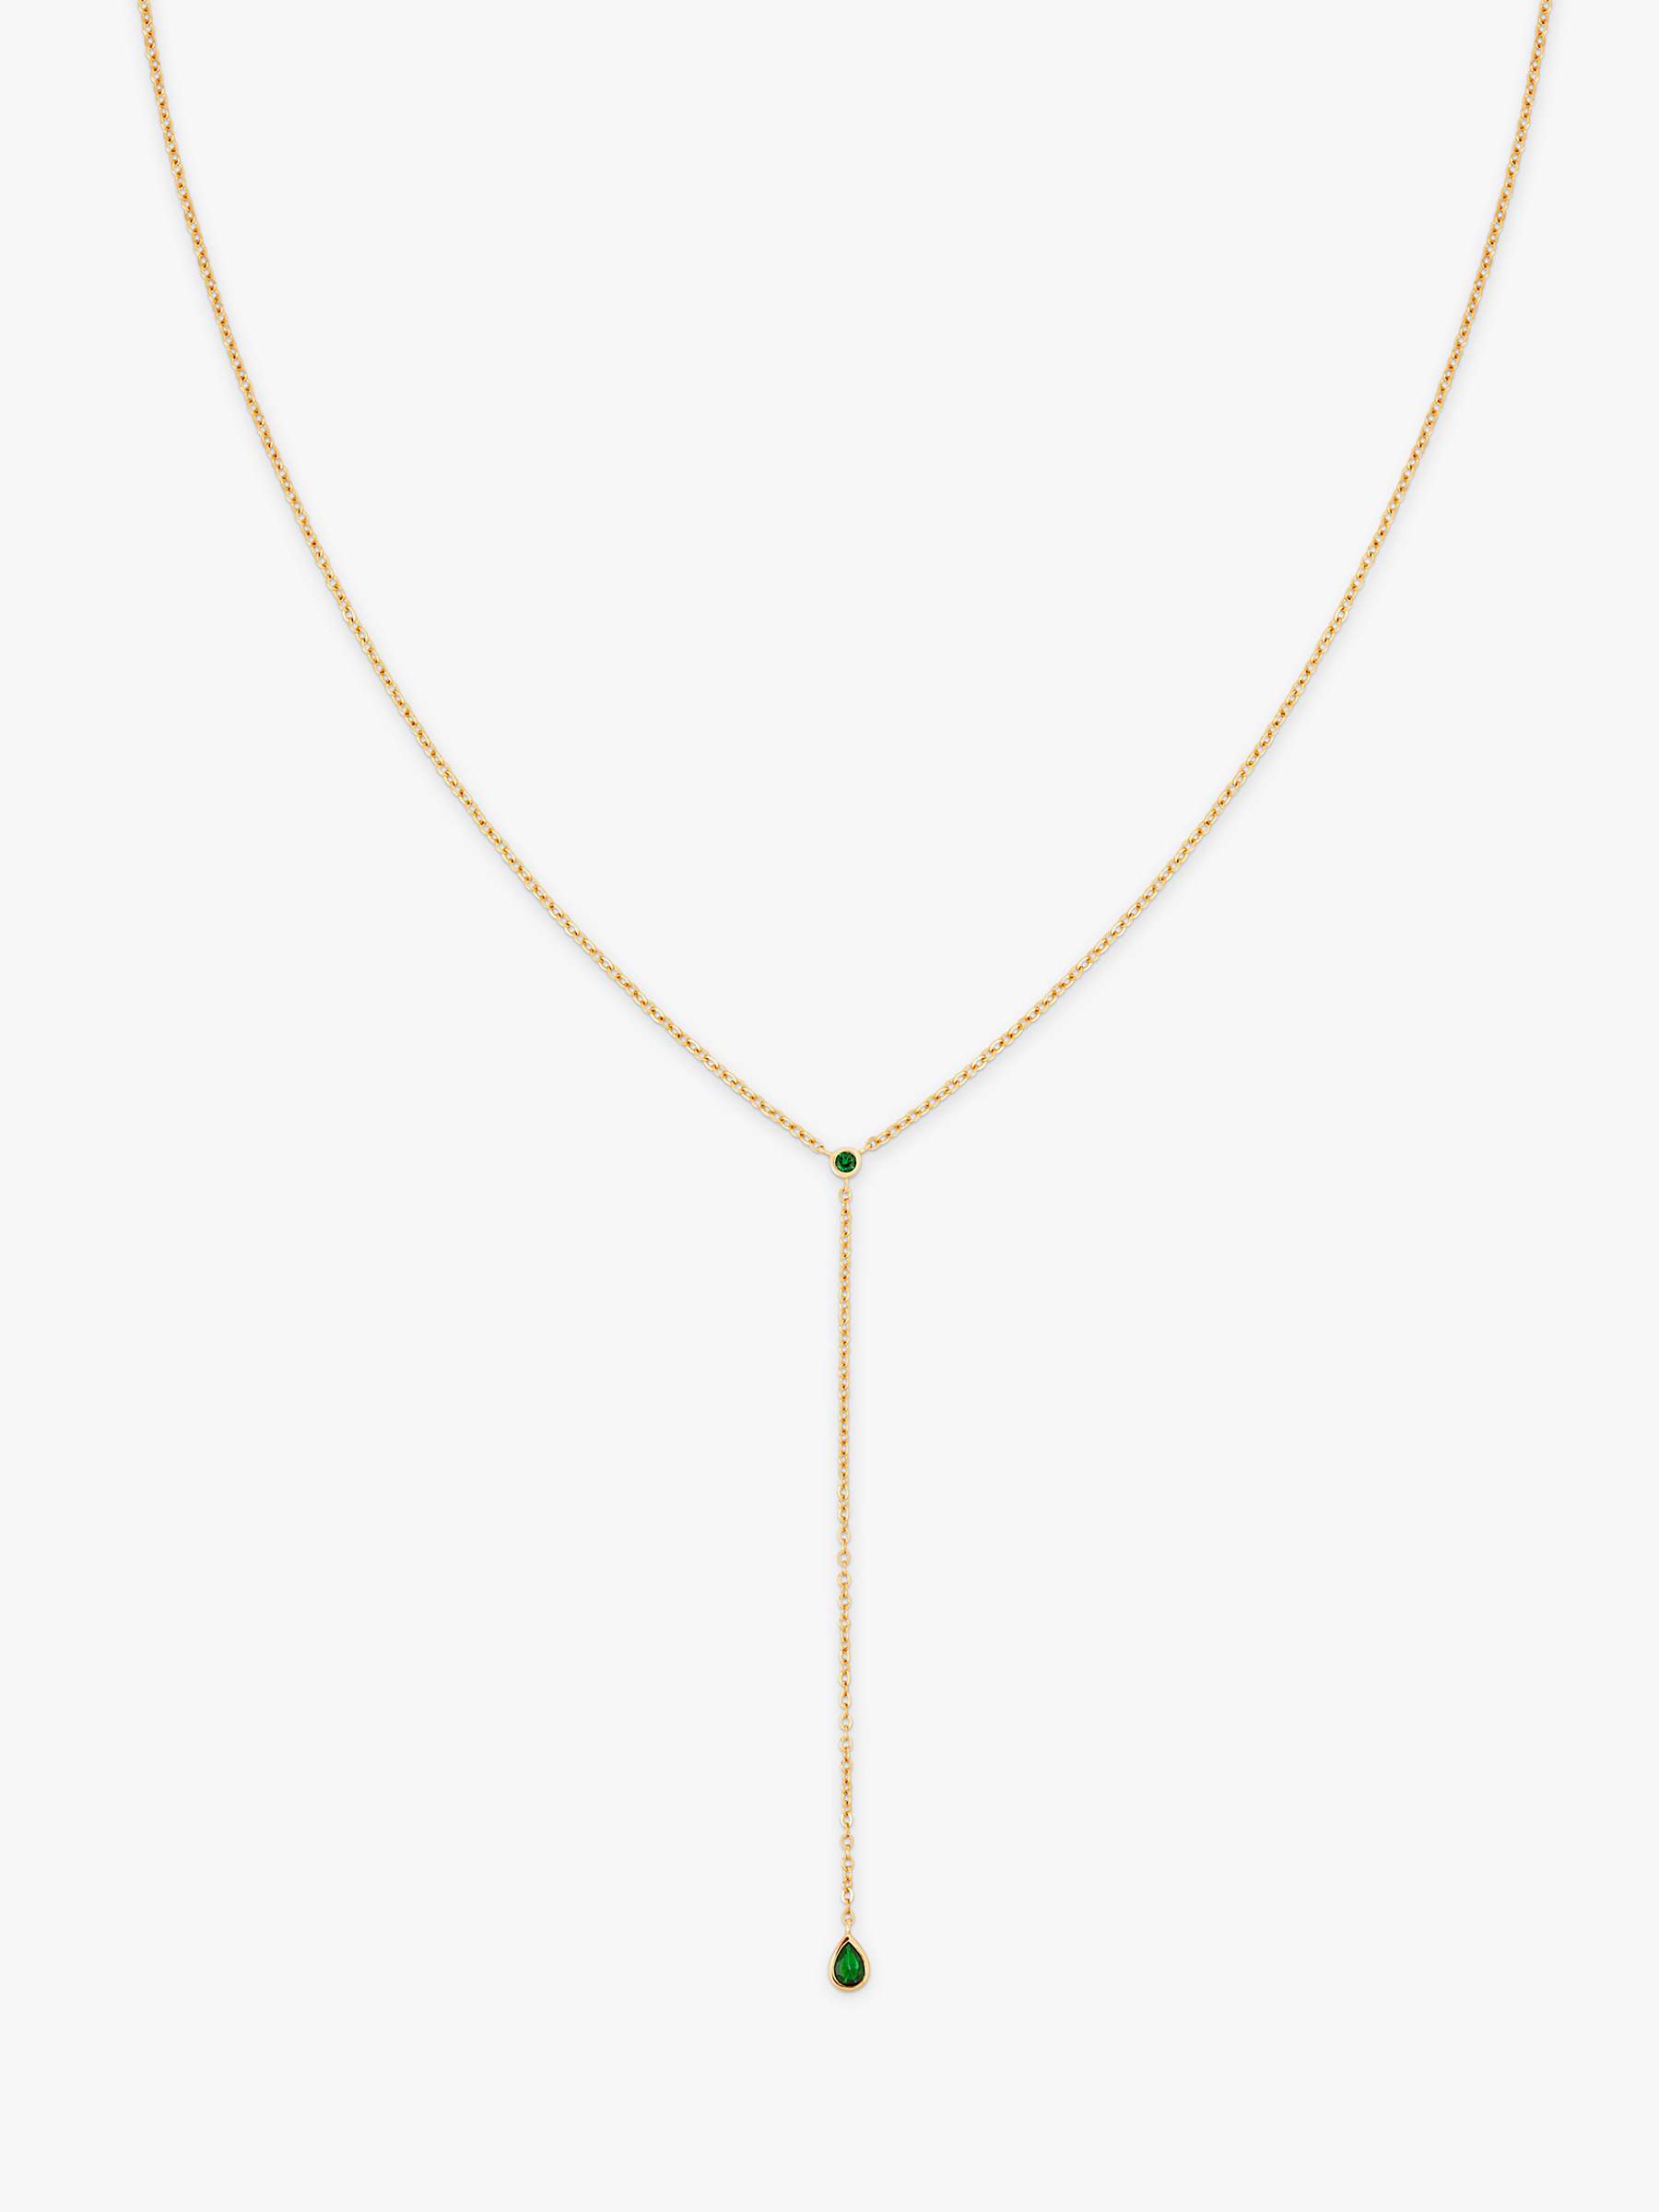 Buy Astrid & Miyu Tranquility Lariat Necklace, Gold/Green Online at johnlewis.com